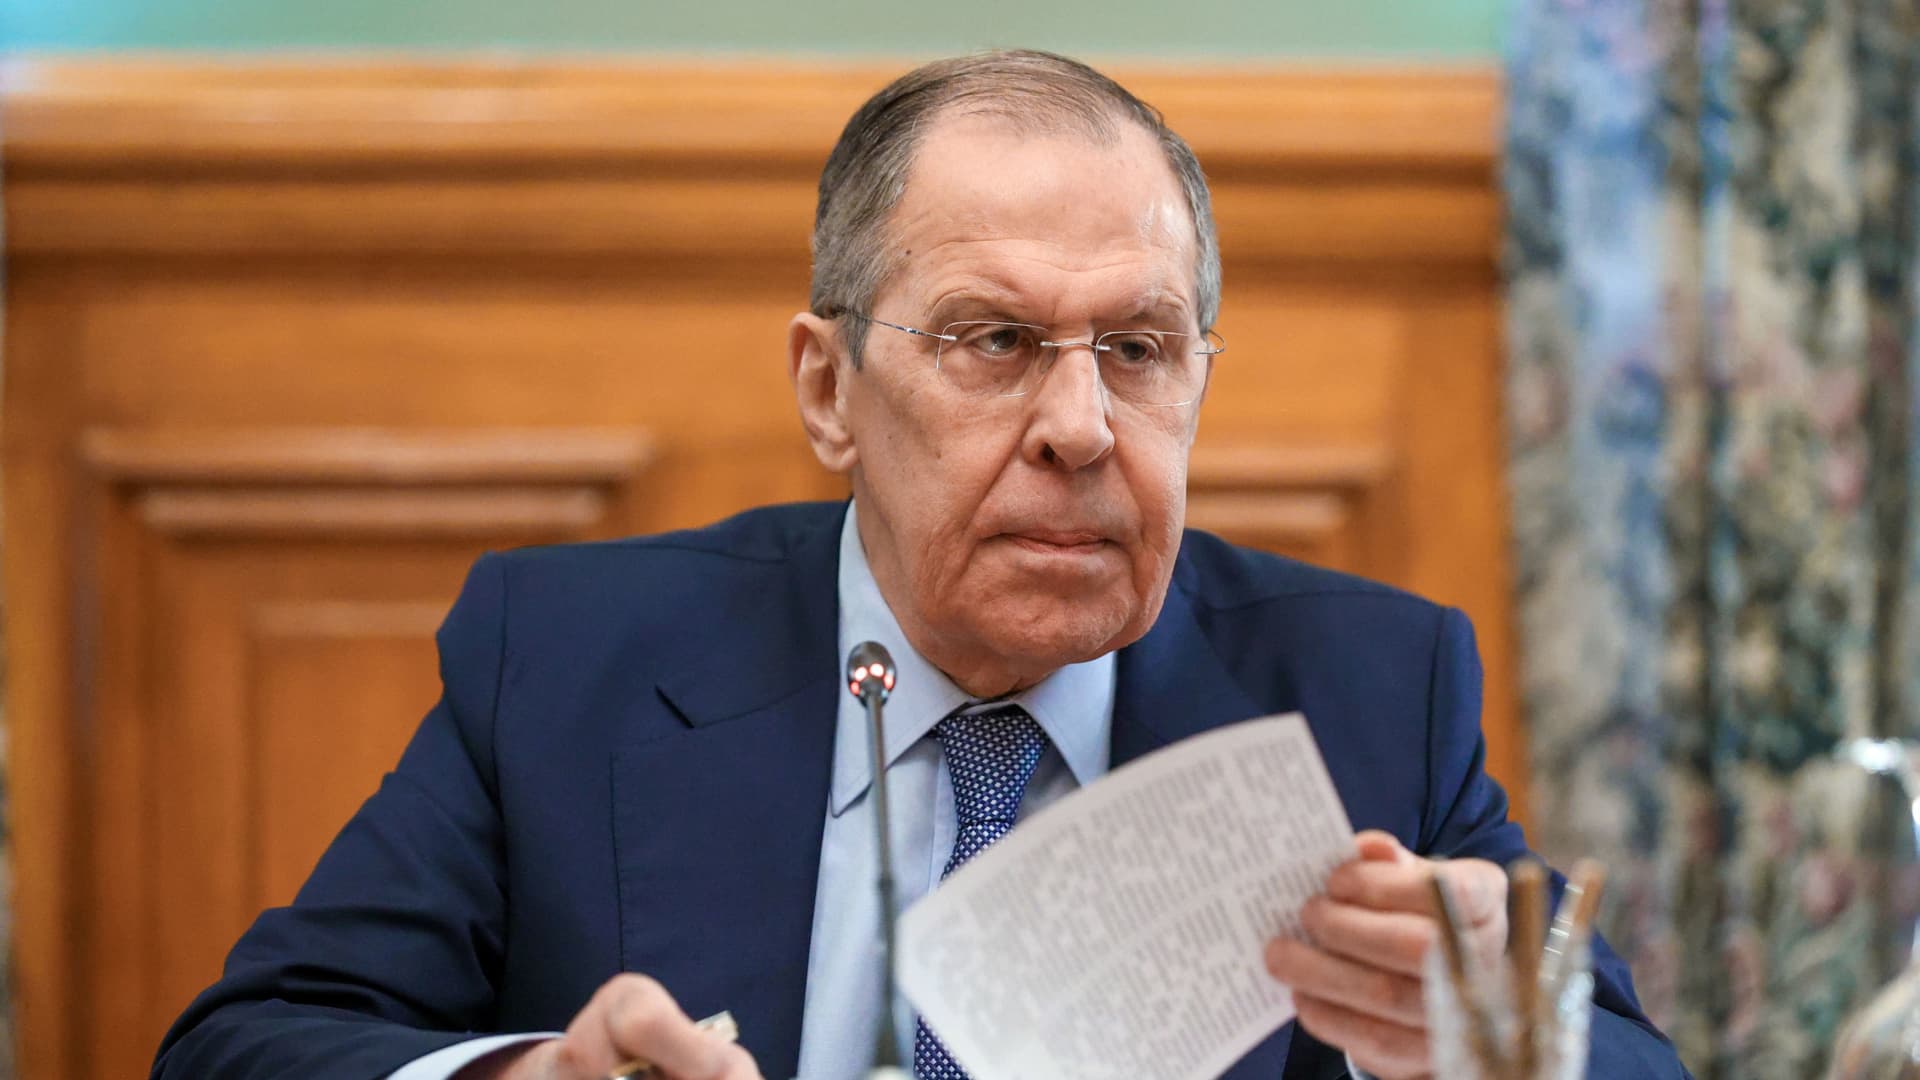 Russia's Foreign Minister Sergei Lavrov in Moscow on February 25, 2022.